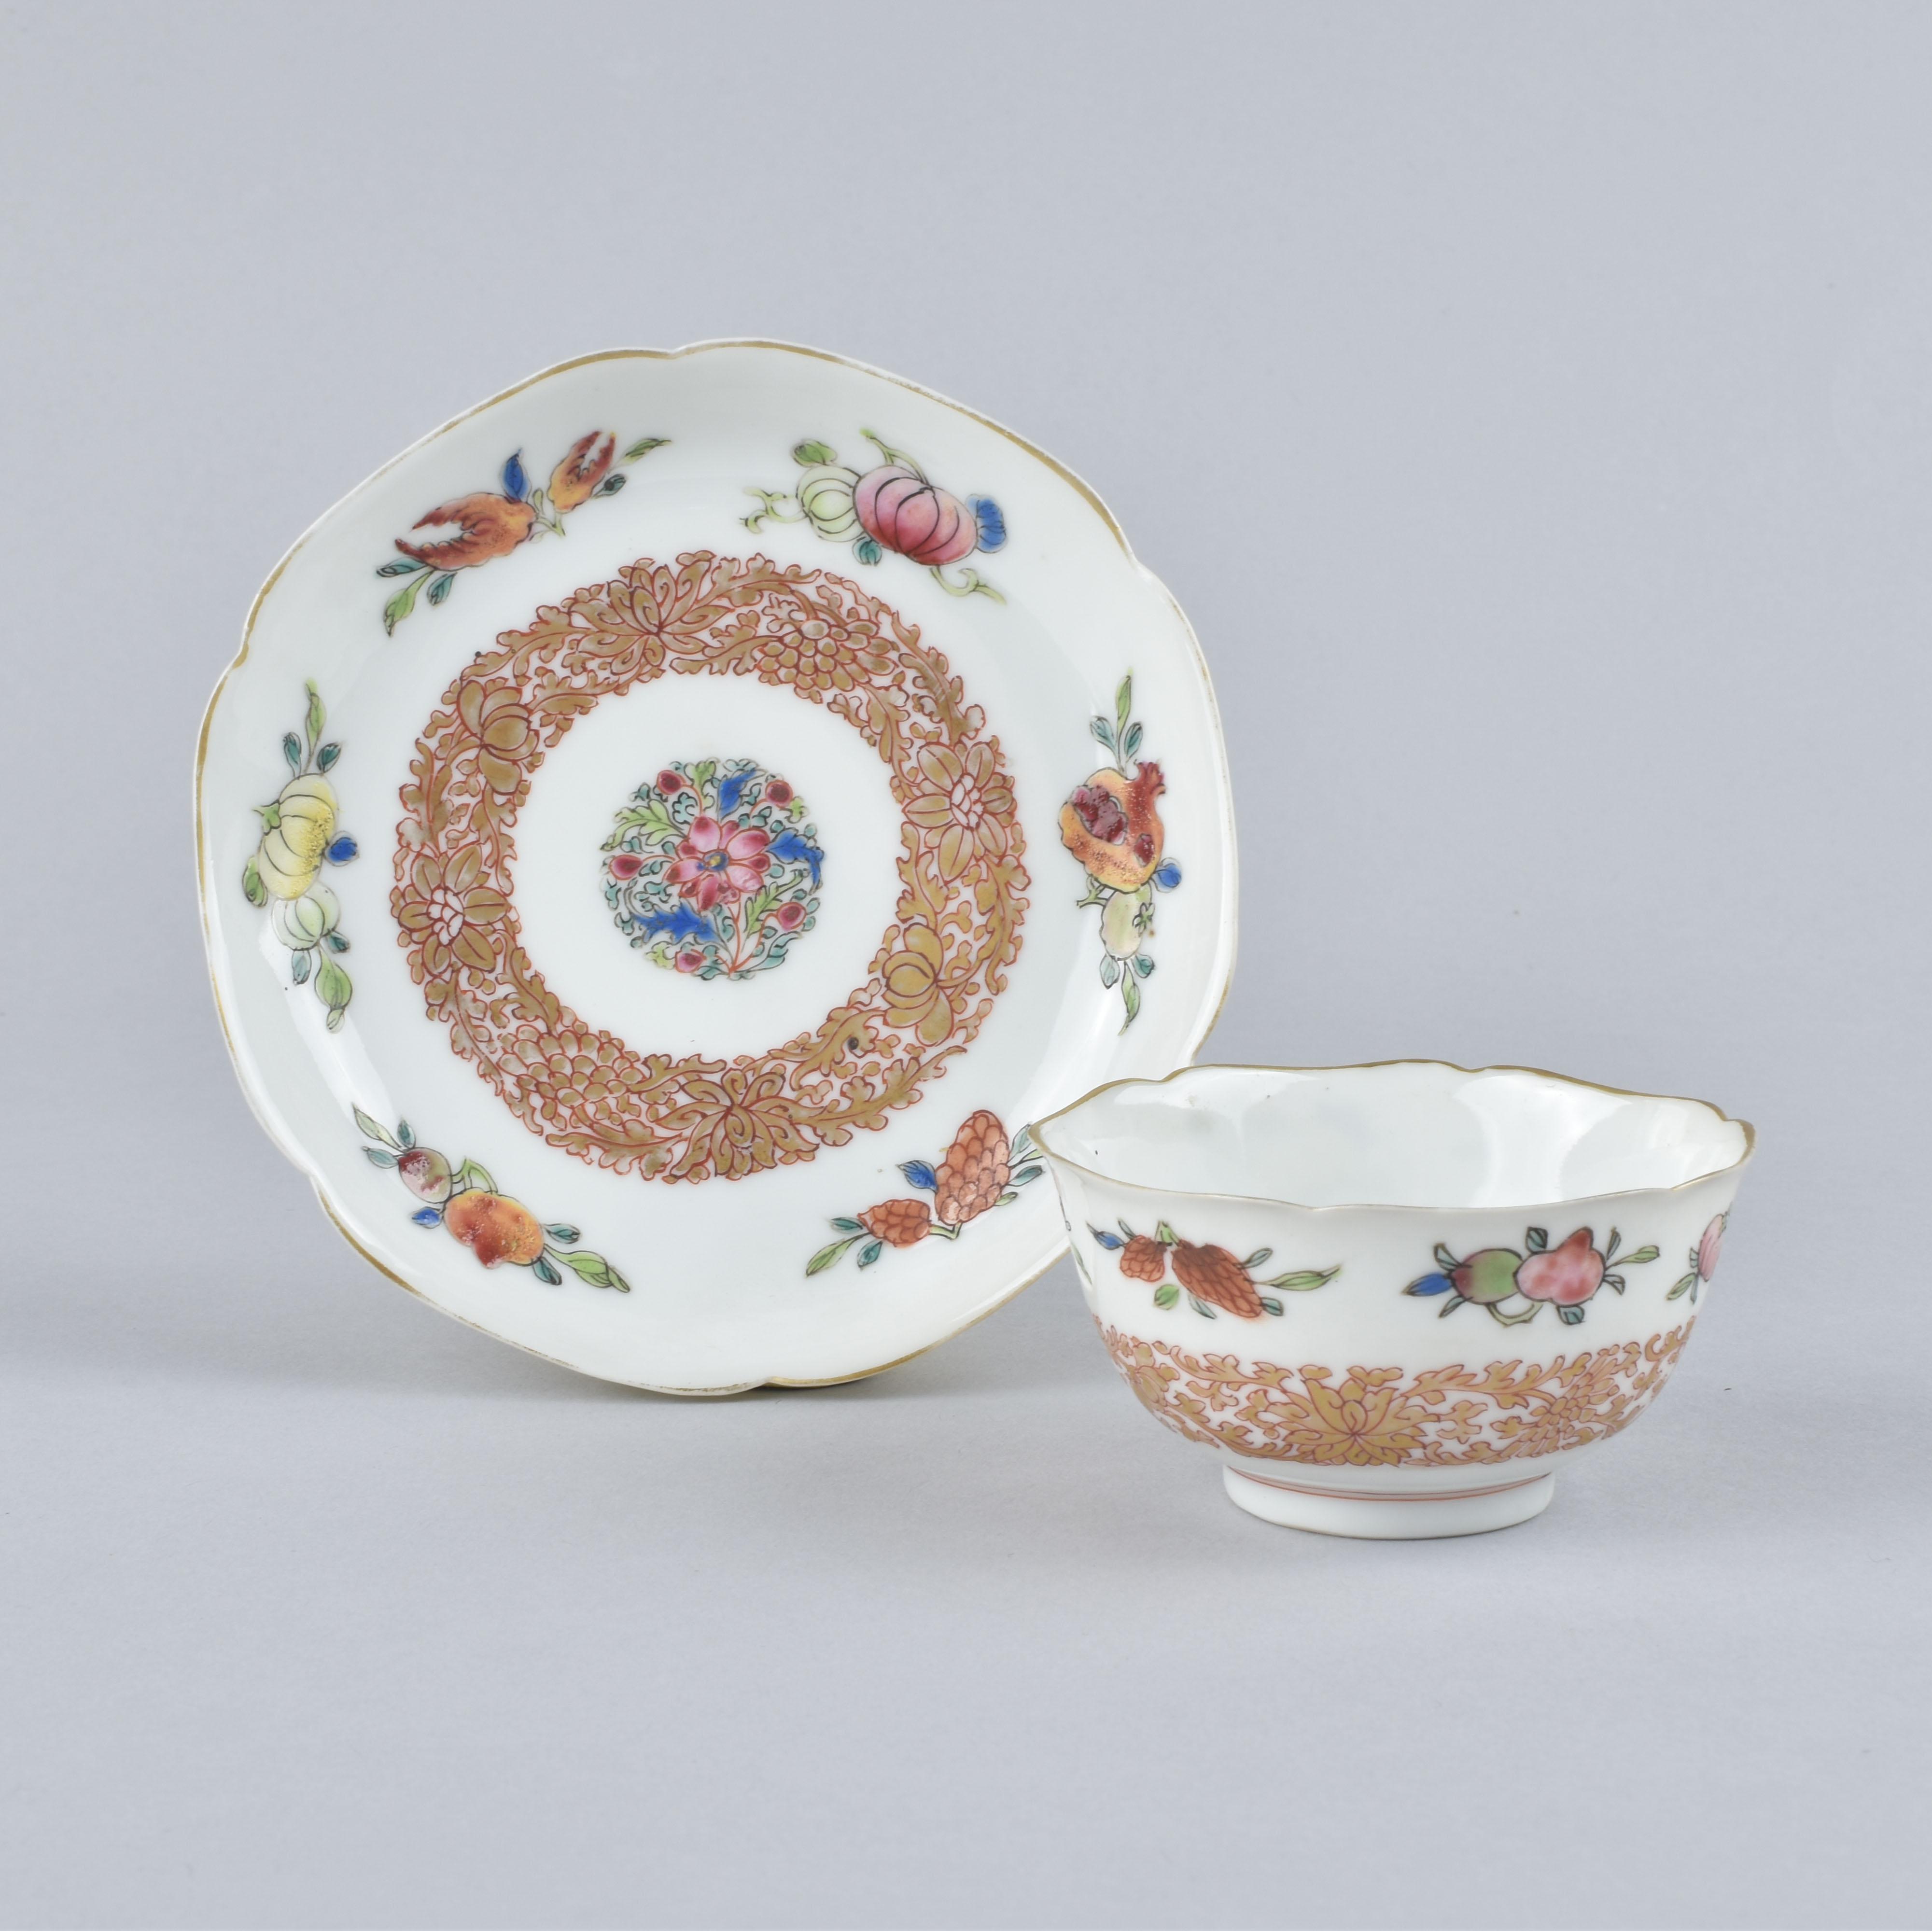 Famille rose Porcelaine Yongzheng (1723-1735), ca. 1735, Chine